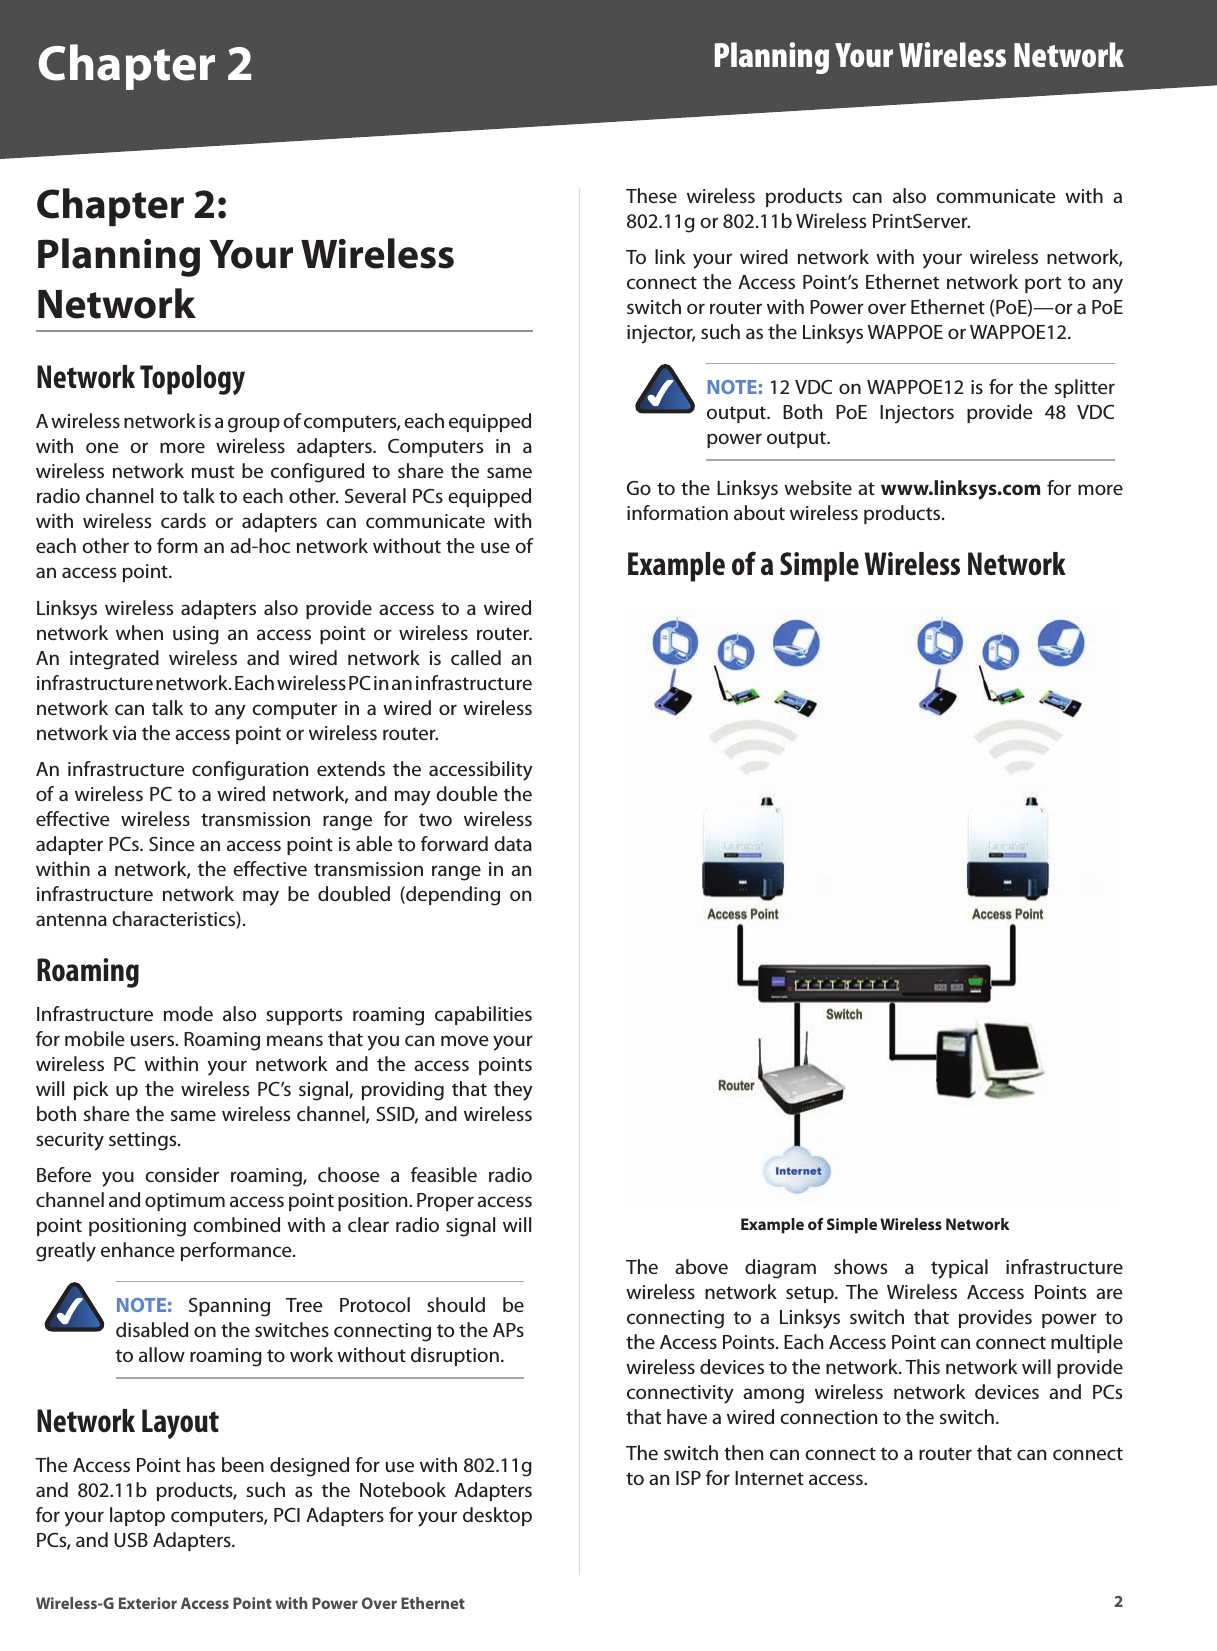 2Planning Your Wireless NetworkWireless-G Exterior Access Point with Power Over EthernetChapter 2Chapter 2:  Planning Your Wireless NetworkNetwork TopologyA wireless network is a group of computers, each equipped with  one  or  more  wireless  adapters.  Computers  in  a wireless network must be configured to share the same radio channel to talk to each other. Several PCs equipped with  wireless  cards  or  adapters  can  communicate  with each other to form an ad-hoc network without the use of an access point.Linksys wireless adapters also  provide access to a  wired network  when  using  an  access  point  or  wireless router. An  integrated  wireless  and  wired  network  is  called  an infrastructure network. Each wireless PC in an infrastructure network can talk to any computer in a wired or wireless network via the access point or wireless router.An infrastructure configuration extends  the  accessibility of a wireless PC to a wired network, and may double the effective  wireless  transmission  range  for  two  wireless adapter PCs. Since an access point is able to forward data within a network, the effective transmission range in an infrastructure  network  may  be  doubled  (depending  on antenna characteristics).RoamingInfrastructure  mode  also  supports  roaming  capabilities for mobile users. Roaming means that you can move your wireless  PC  within  your  network  and  the  access  points will pick up  the wireless PC’s  signal, providing that they both share the same wireless channel, SSID, and wireless security settings.Before  you  consider  roaming,  choose  a  feasible  radio channel and optimum access point position. Proper access point positioning combined with a clear radio signal will greatly enhance performance.NOTE:  Spanning  Tree  Protocol  should  be disabled on the switches connecting to the APs to allow roaming to work without disruption.Network LayoutThe Access Point has been designed for use with 802.11g and  802.11b  products,  such  as  the  Notebook  Adapters for your laptop computers, PCI Adapters for your desktop PCs, and USB Adapters.These  wireless  products  can  also  communicate  with  a 802.11g or 802.11b Wireless PrintServer.To  link  your  wired  network  with  your  wireless  network, connect the Access Point’s Ethernet network port to any switch or router with Power over Ethernet (PoE)—or a PoE injector, such as the Linksys WAPPOE or WAPPOE12.NOTE: 12 VDC on WAPPOE12 is for the splitter output.  Both  PoE  Injectors  provide  48  VDC power output.Go to the Linksys website at www.linksys.com for more information about wireless products.Example of a Simple Wireless NetworkExample of Simple Wireless NetworkThe  above  diagram  shows  a  typical  infrastructure wireless  network  setup.  The  Wireless  Access  Points  are connecting  to  a  Linksys  switch  that  provides  power  to the Access Points. Each Access Point can connect multiple wireless devices to the network. This network will provide connectivity  among  wireless  network  devices  and  PCs that have a wired connection to the switch.The switch then can connect to a router that can connect to an ISP for Internet access.